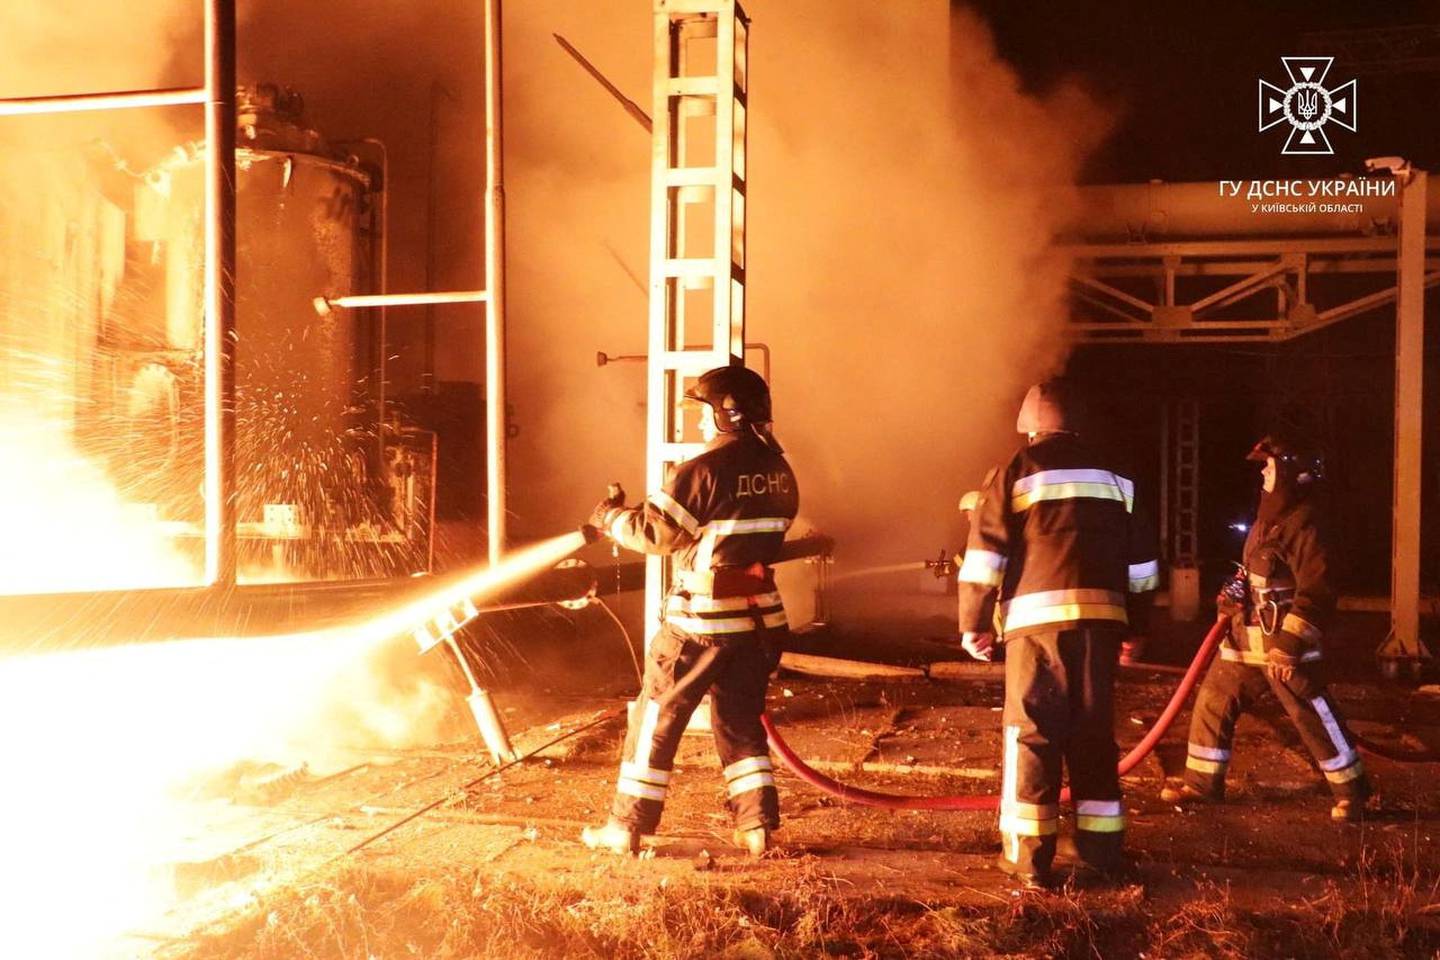 Firefighters tackle a blaze at energy infrastructure facilities in Ukraine after a Russian drone attack. Reuters 